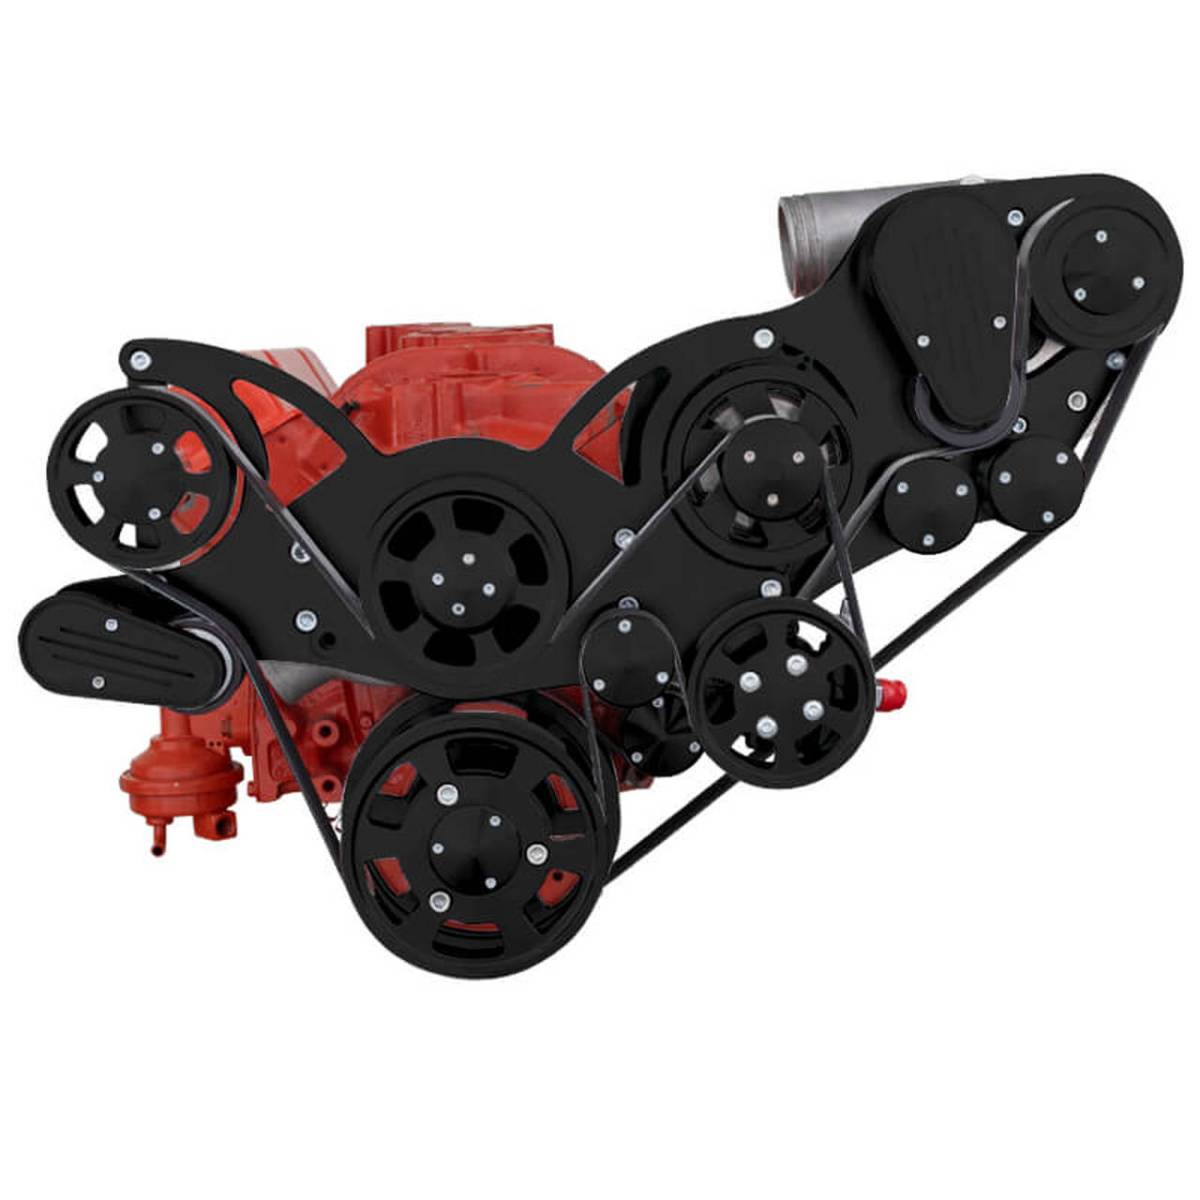 CVF Racing - CVF Wraptor Chevy Small Block Procharger Serpentine Bracket System with Power Steering and Alternator - Black - Image 1